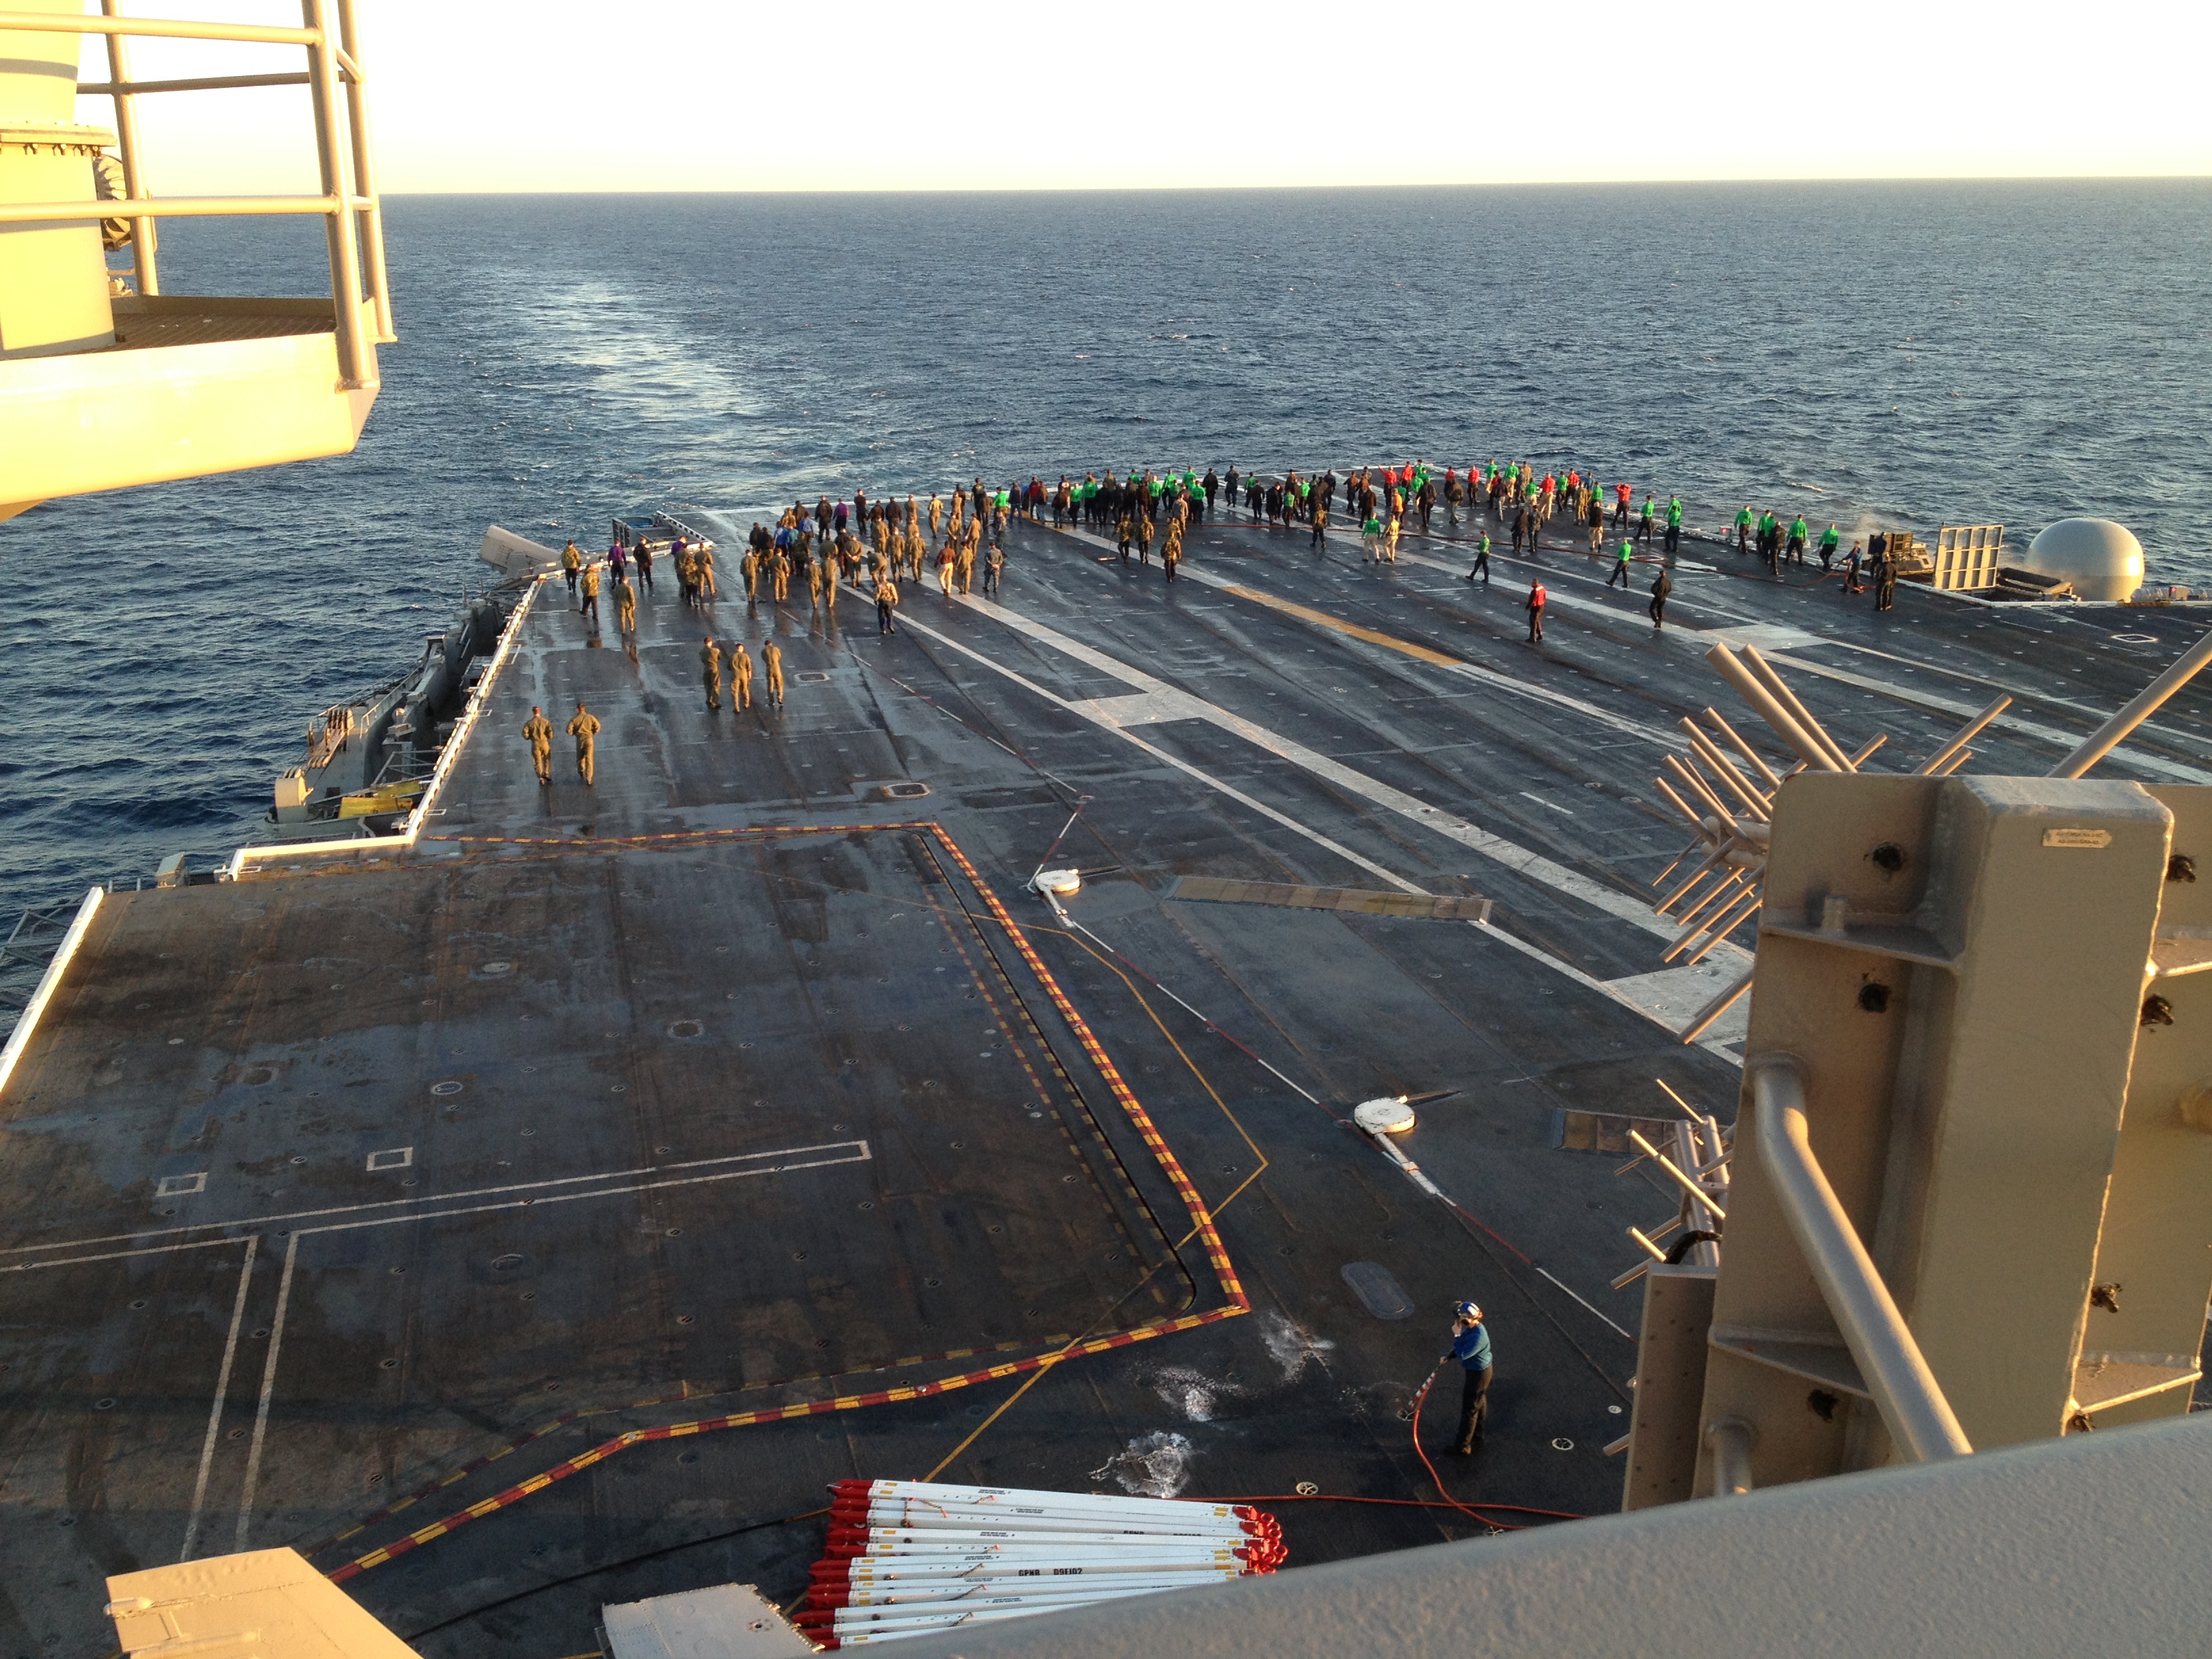 Looking off the deck of the USS Carl Vinson